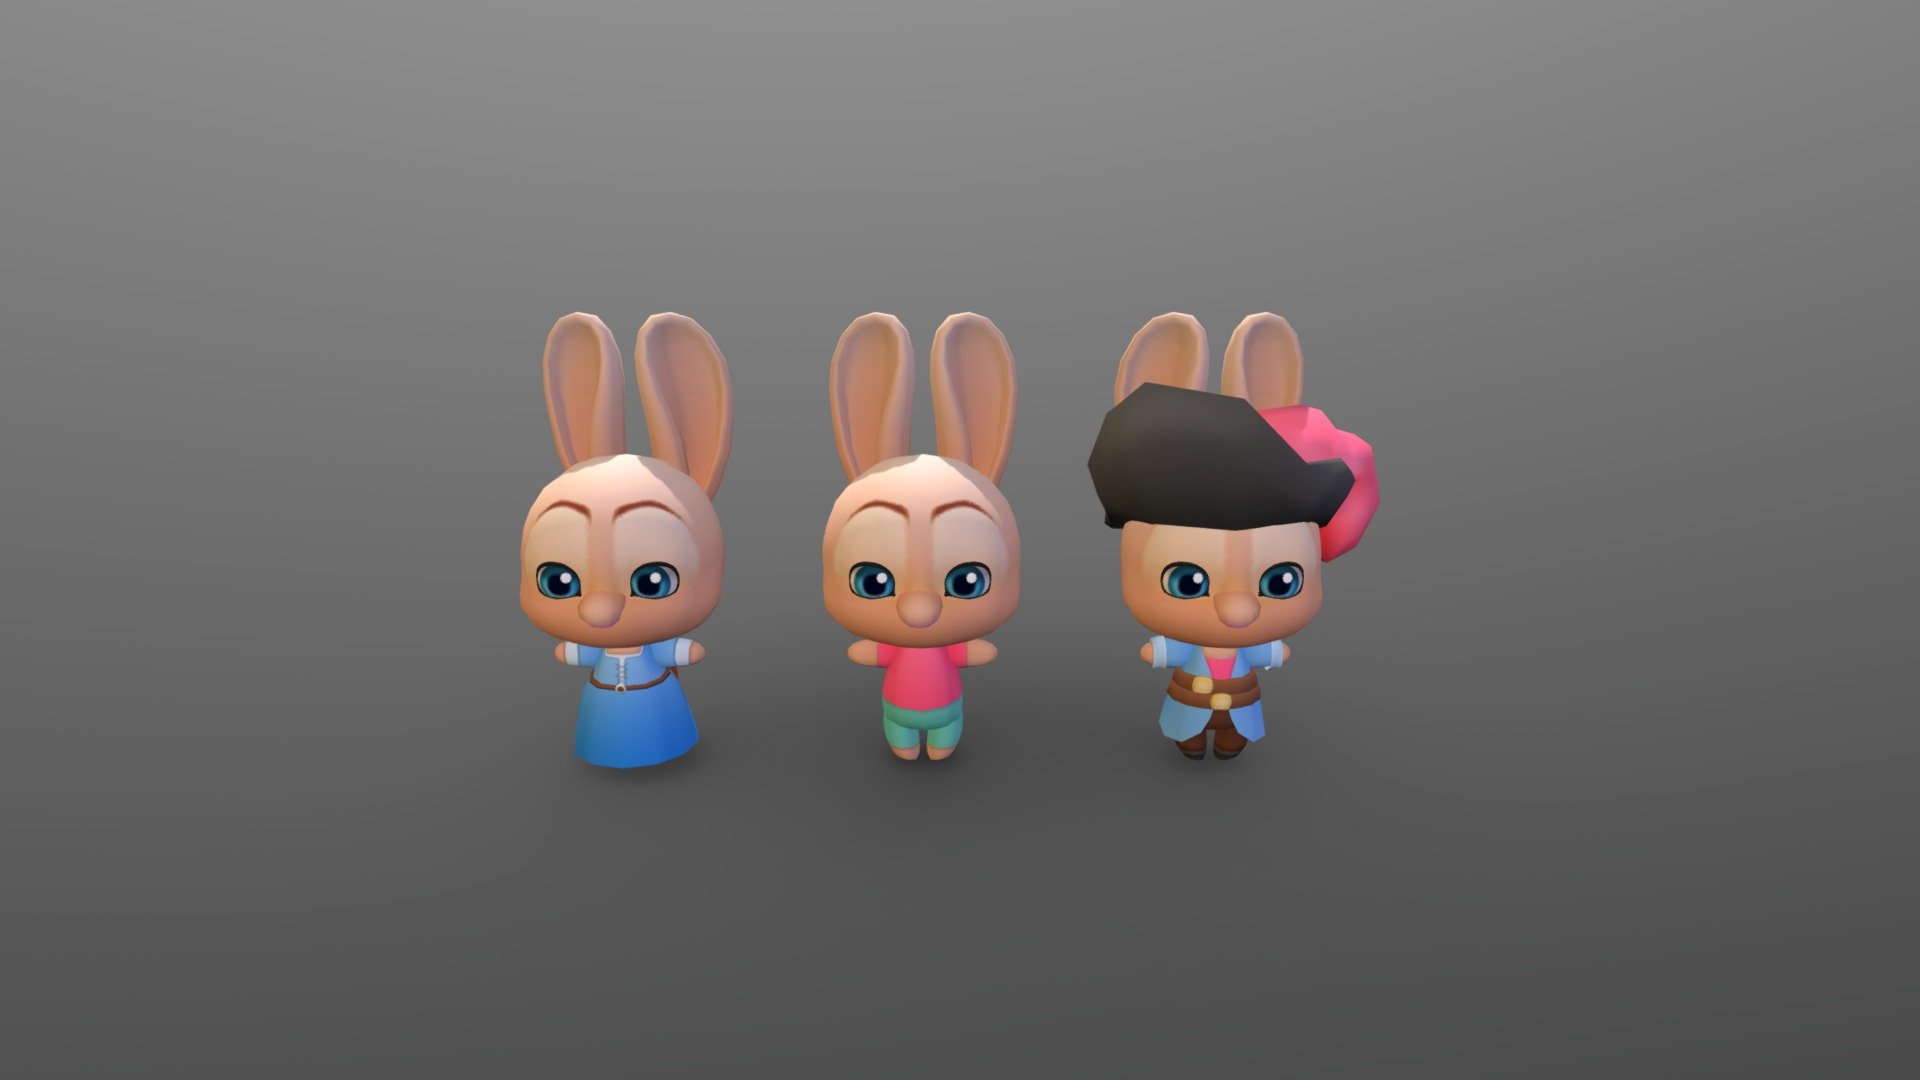 Character for Mighty Kingdom’s “Critters” games.

Modelled in Maya Textured in Photoshop

*Concept by Samuel Read - Critters: Bunny - 3D model by Cassandra Lindsay (@casslindsay) 3d model